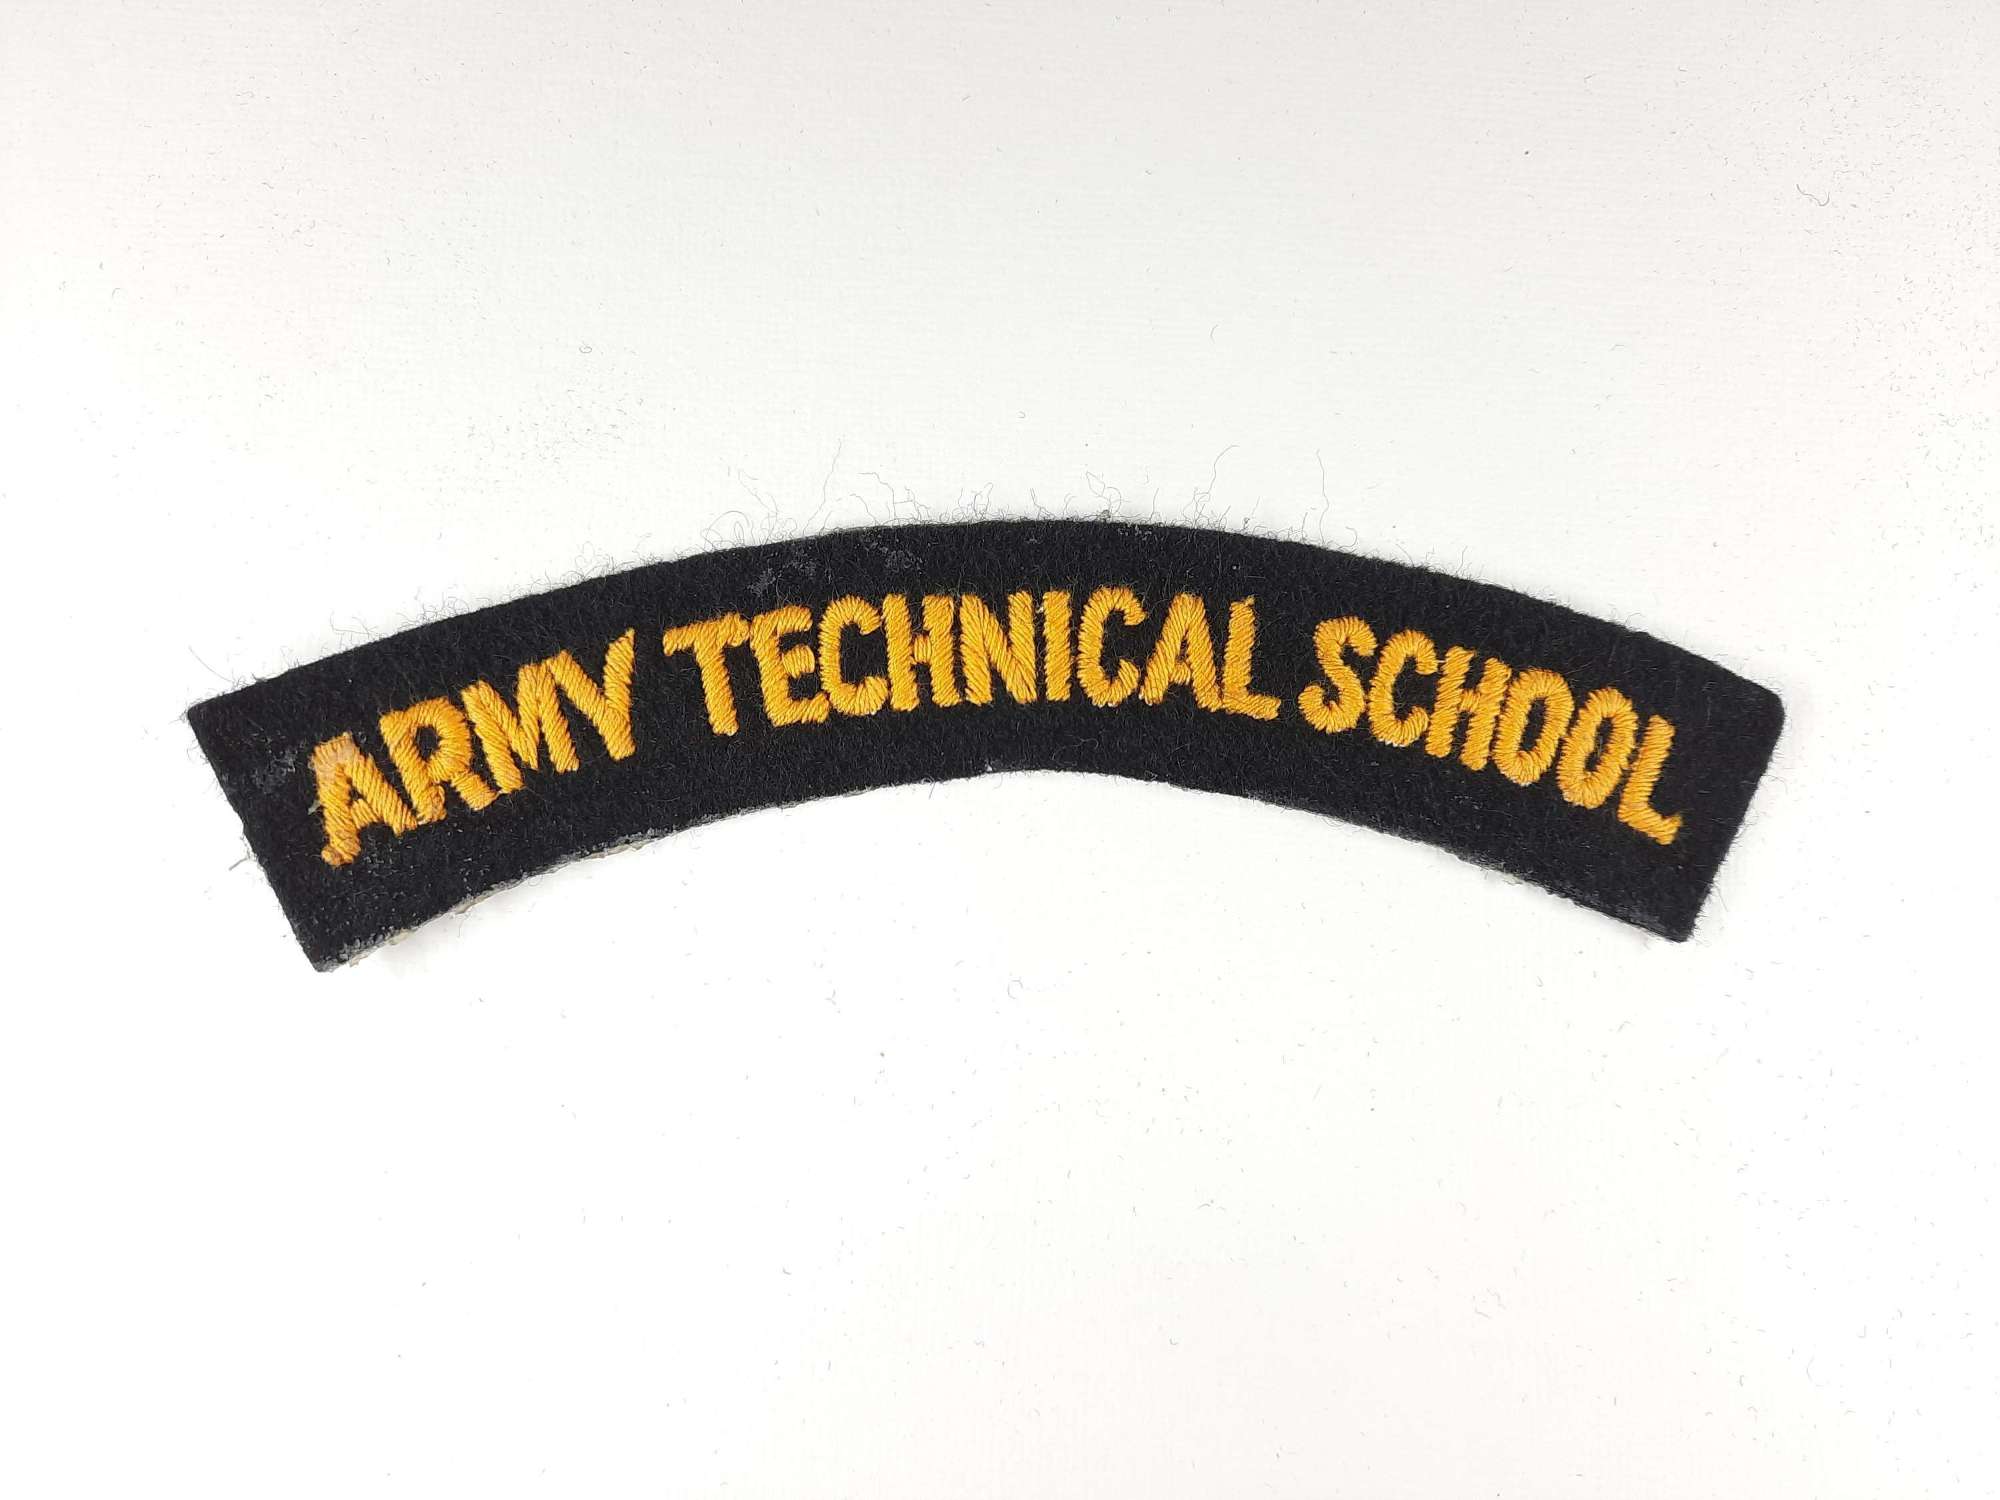 Army Technical School Shoulder Title